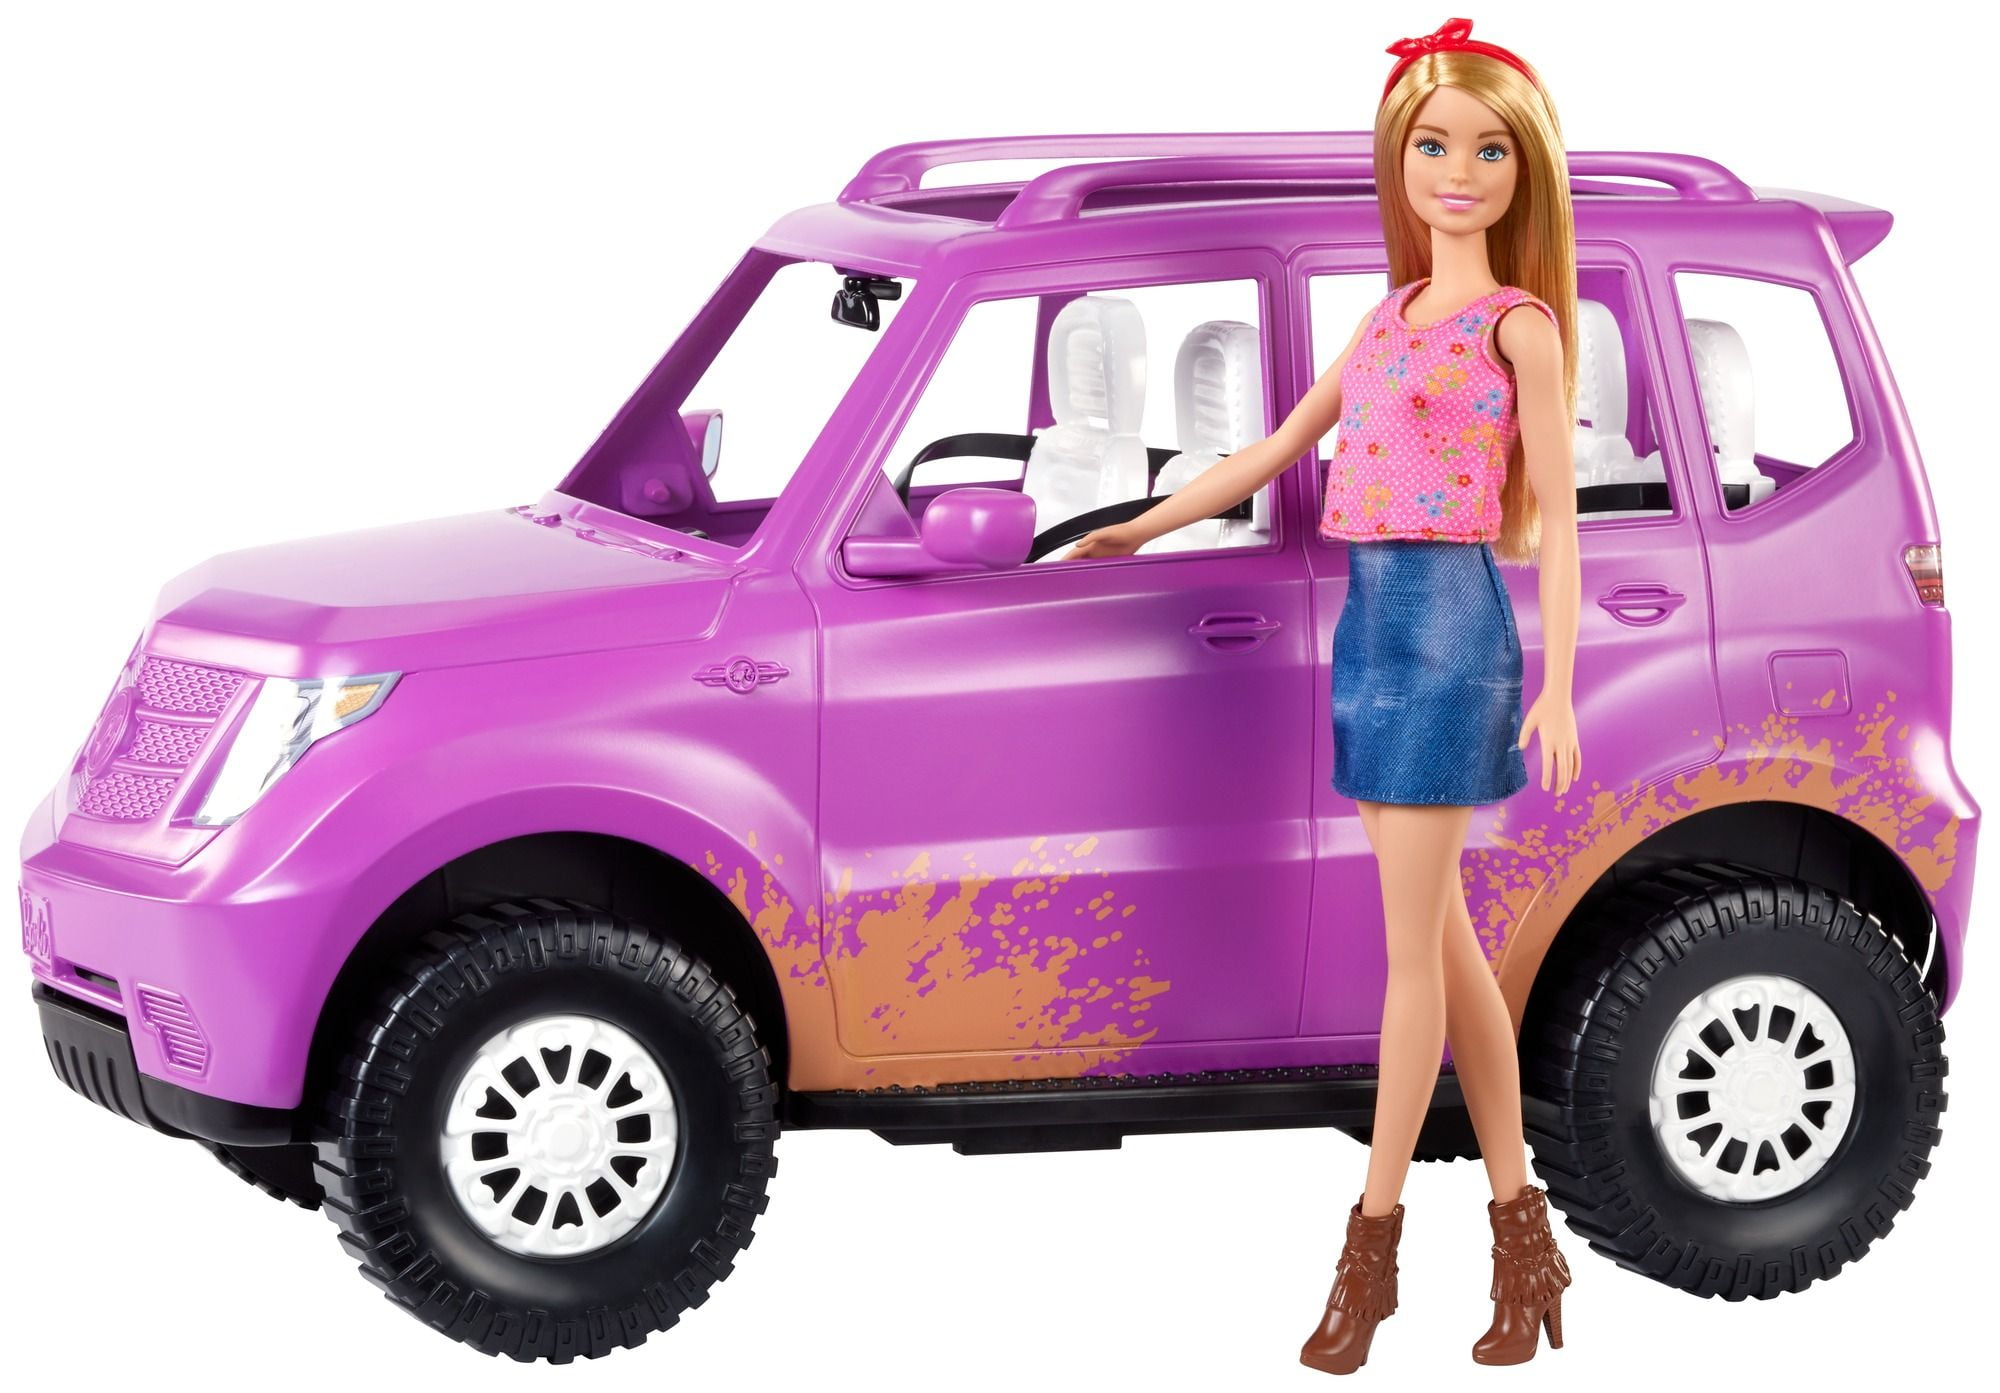 Barbie Purple Jeep Vehicle With Rolling Wheels Gmt46 Mattel for sale online